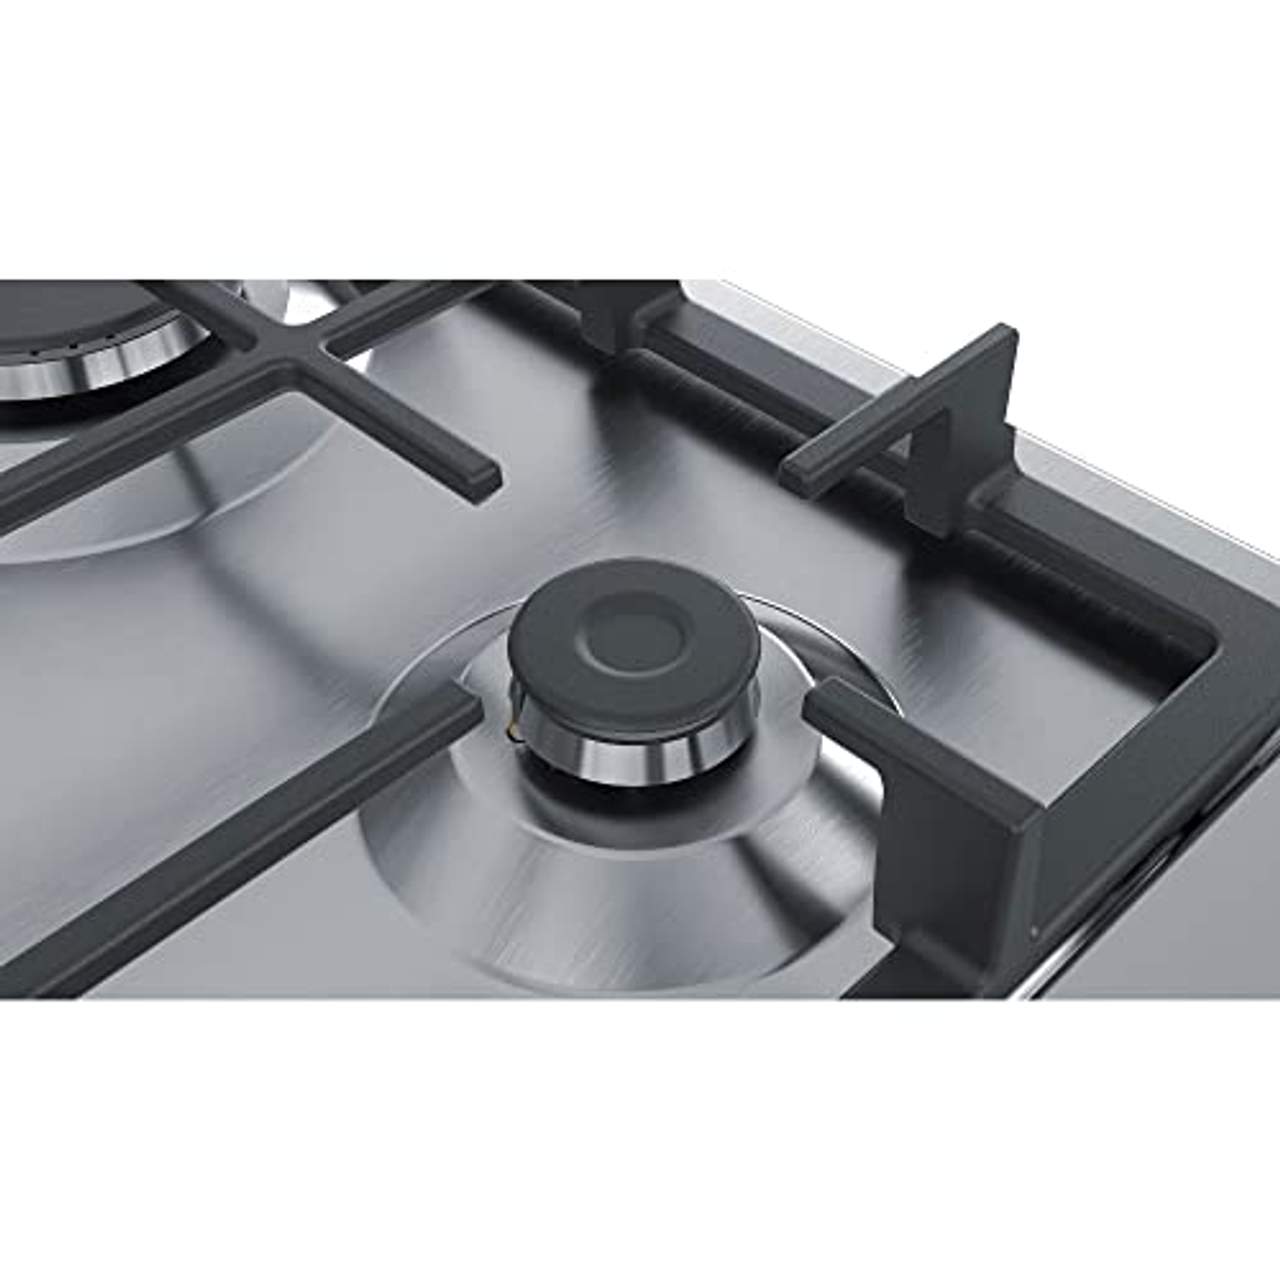 Bosch Serie 4 PGH6B5B90 hob Stainless steel Built-in Gas 4 zone